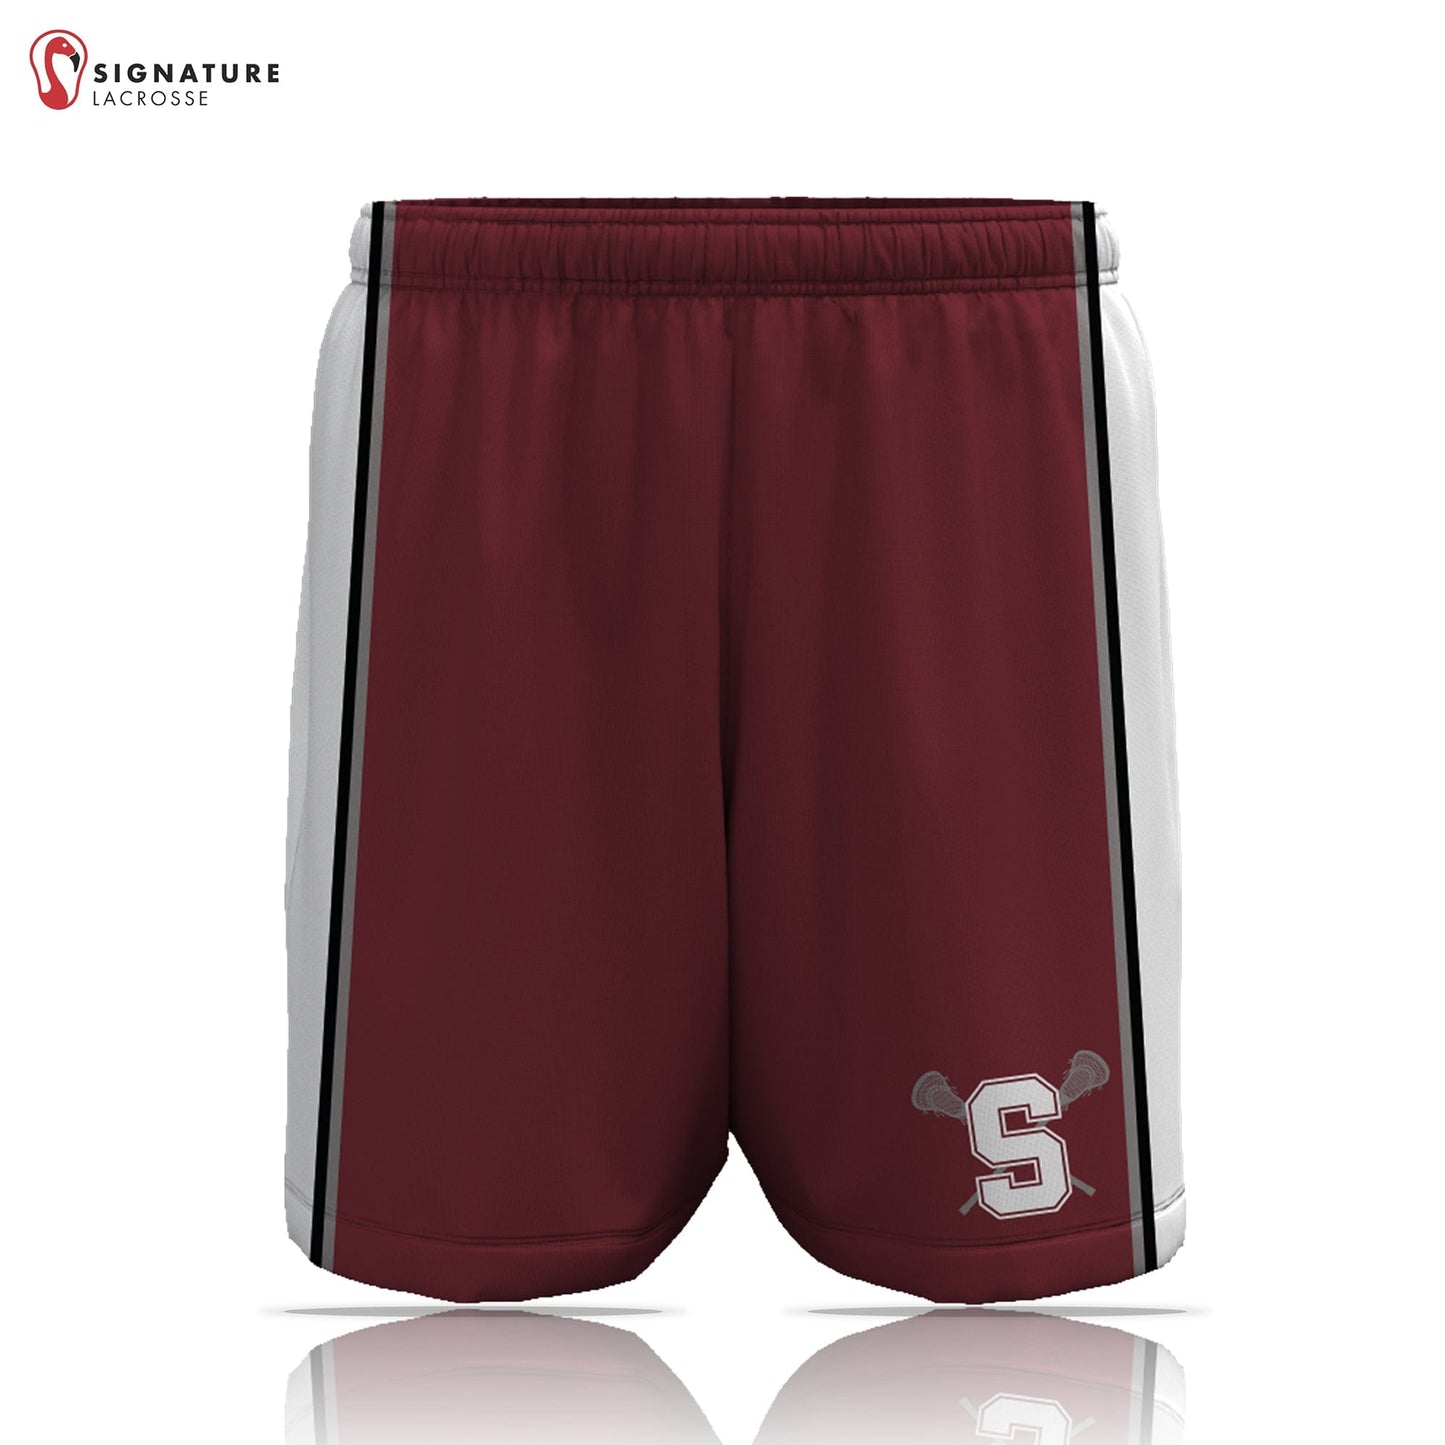 State College Men's Player Game Shorts: 7-8 Signature Lacrosse